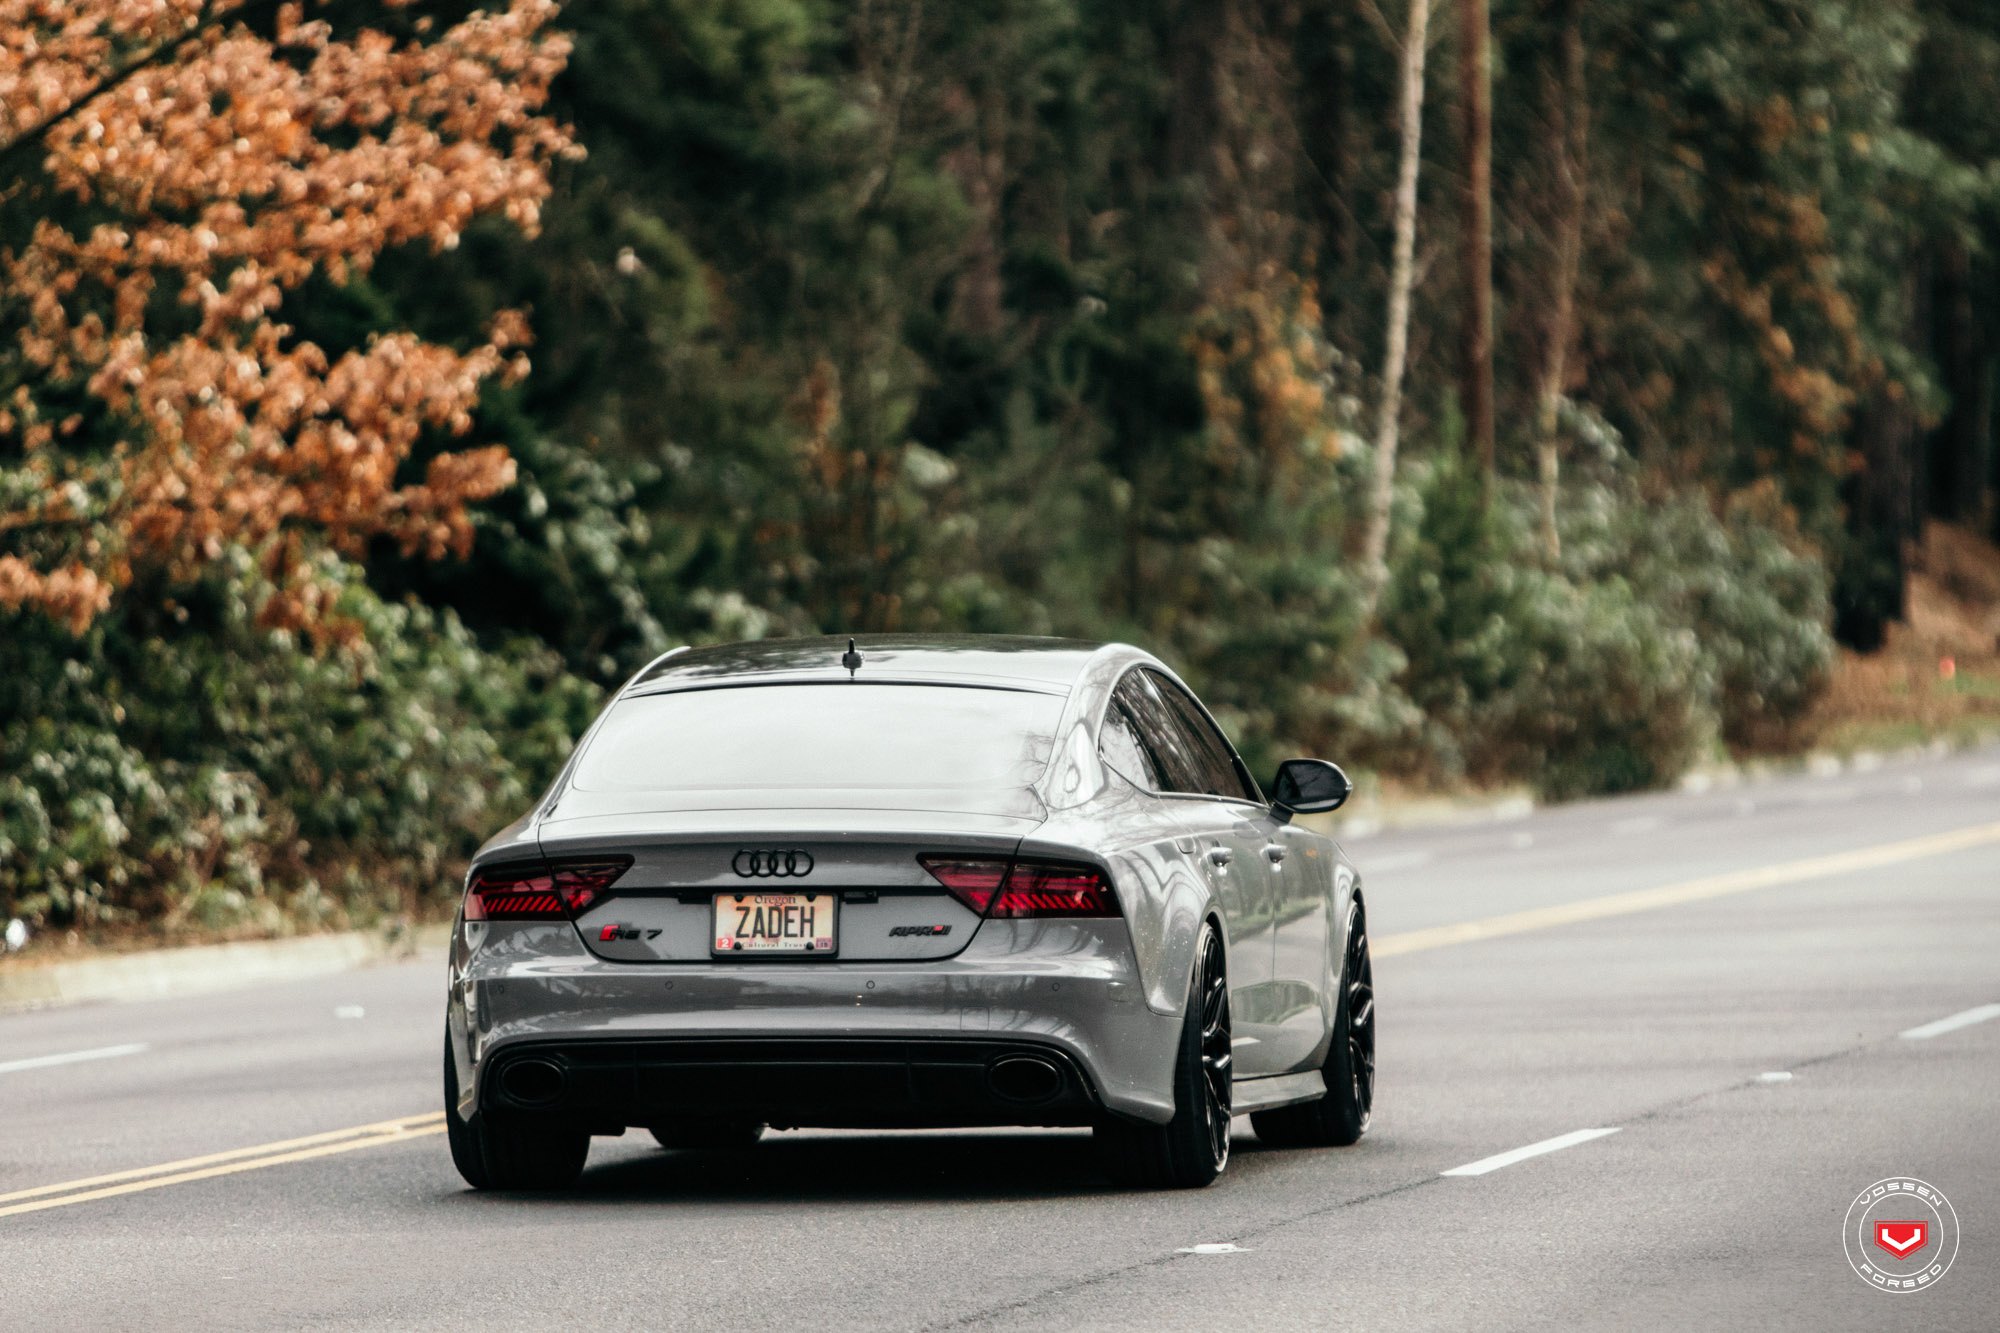 Gray Audi A7 with Custom Red Smoke Taillights - Photo by Vossen